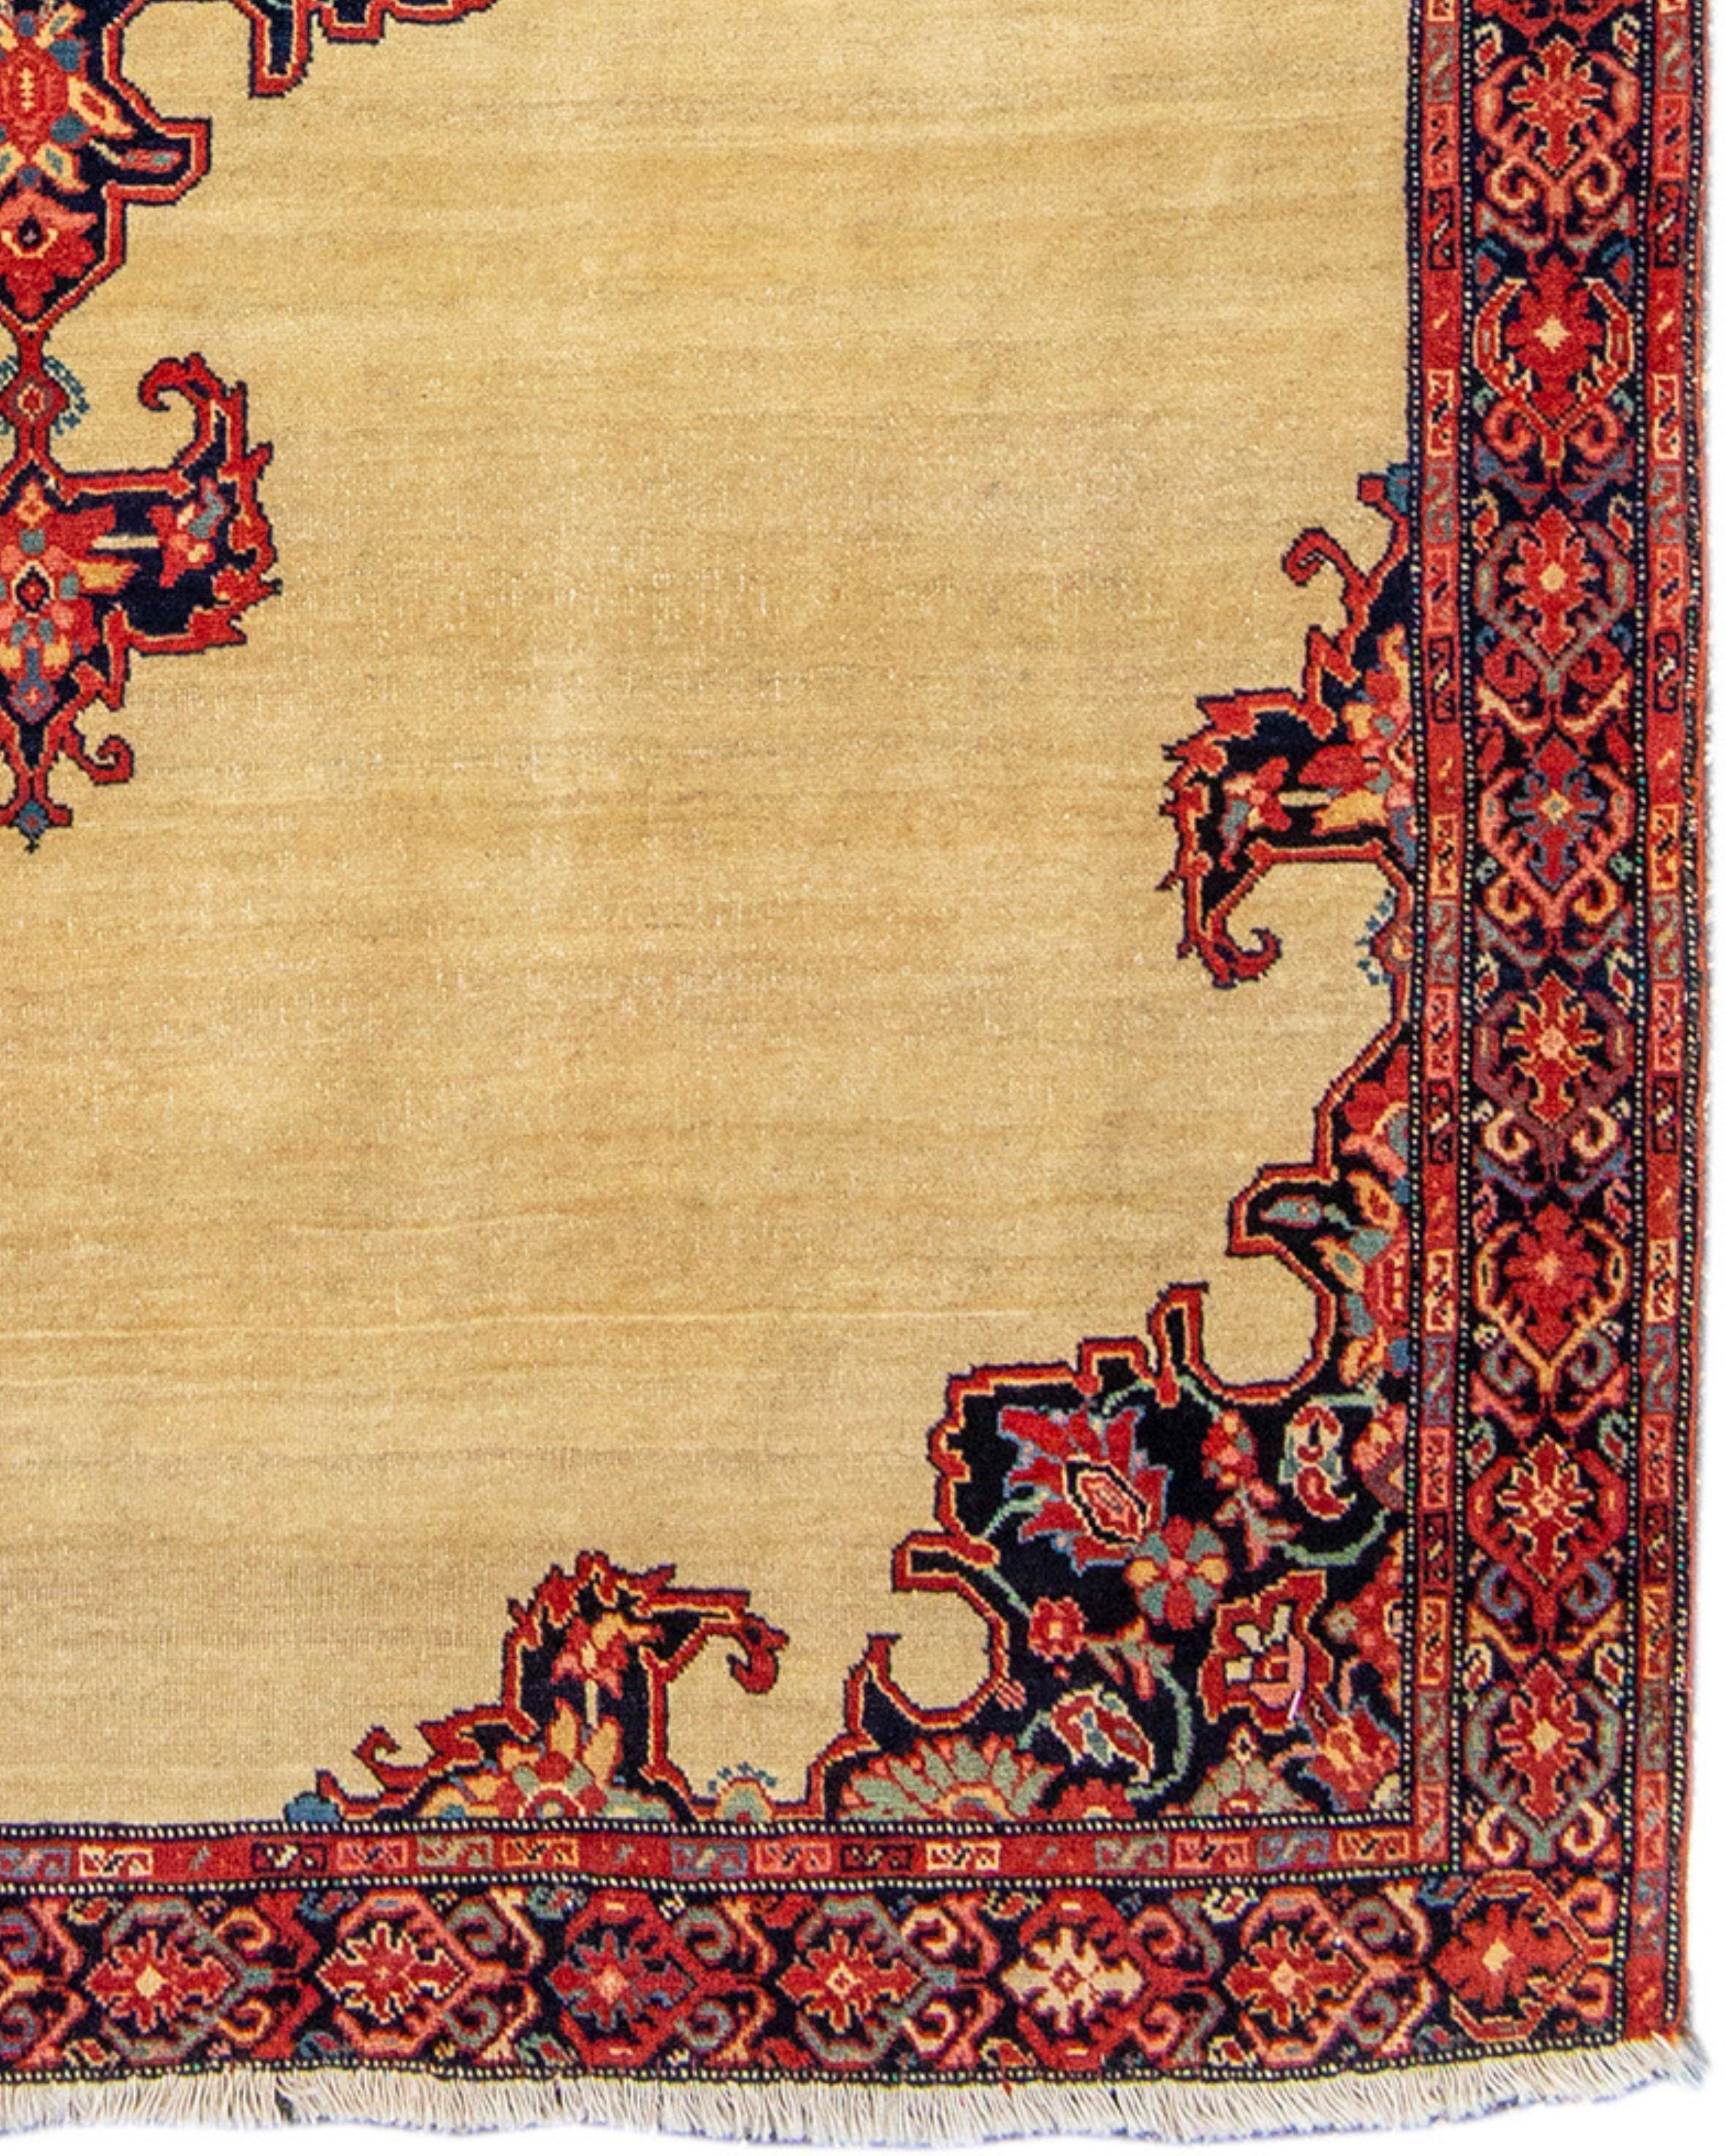 Antique Persian Fereghan Sarouk Rug, 19th Century In Excellent Condition For Sale In San Francisco, CA